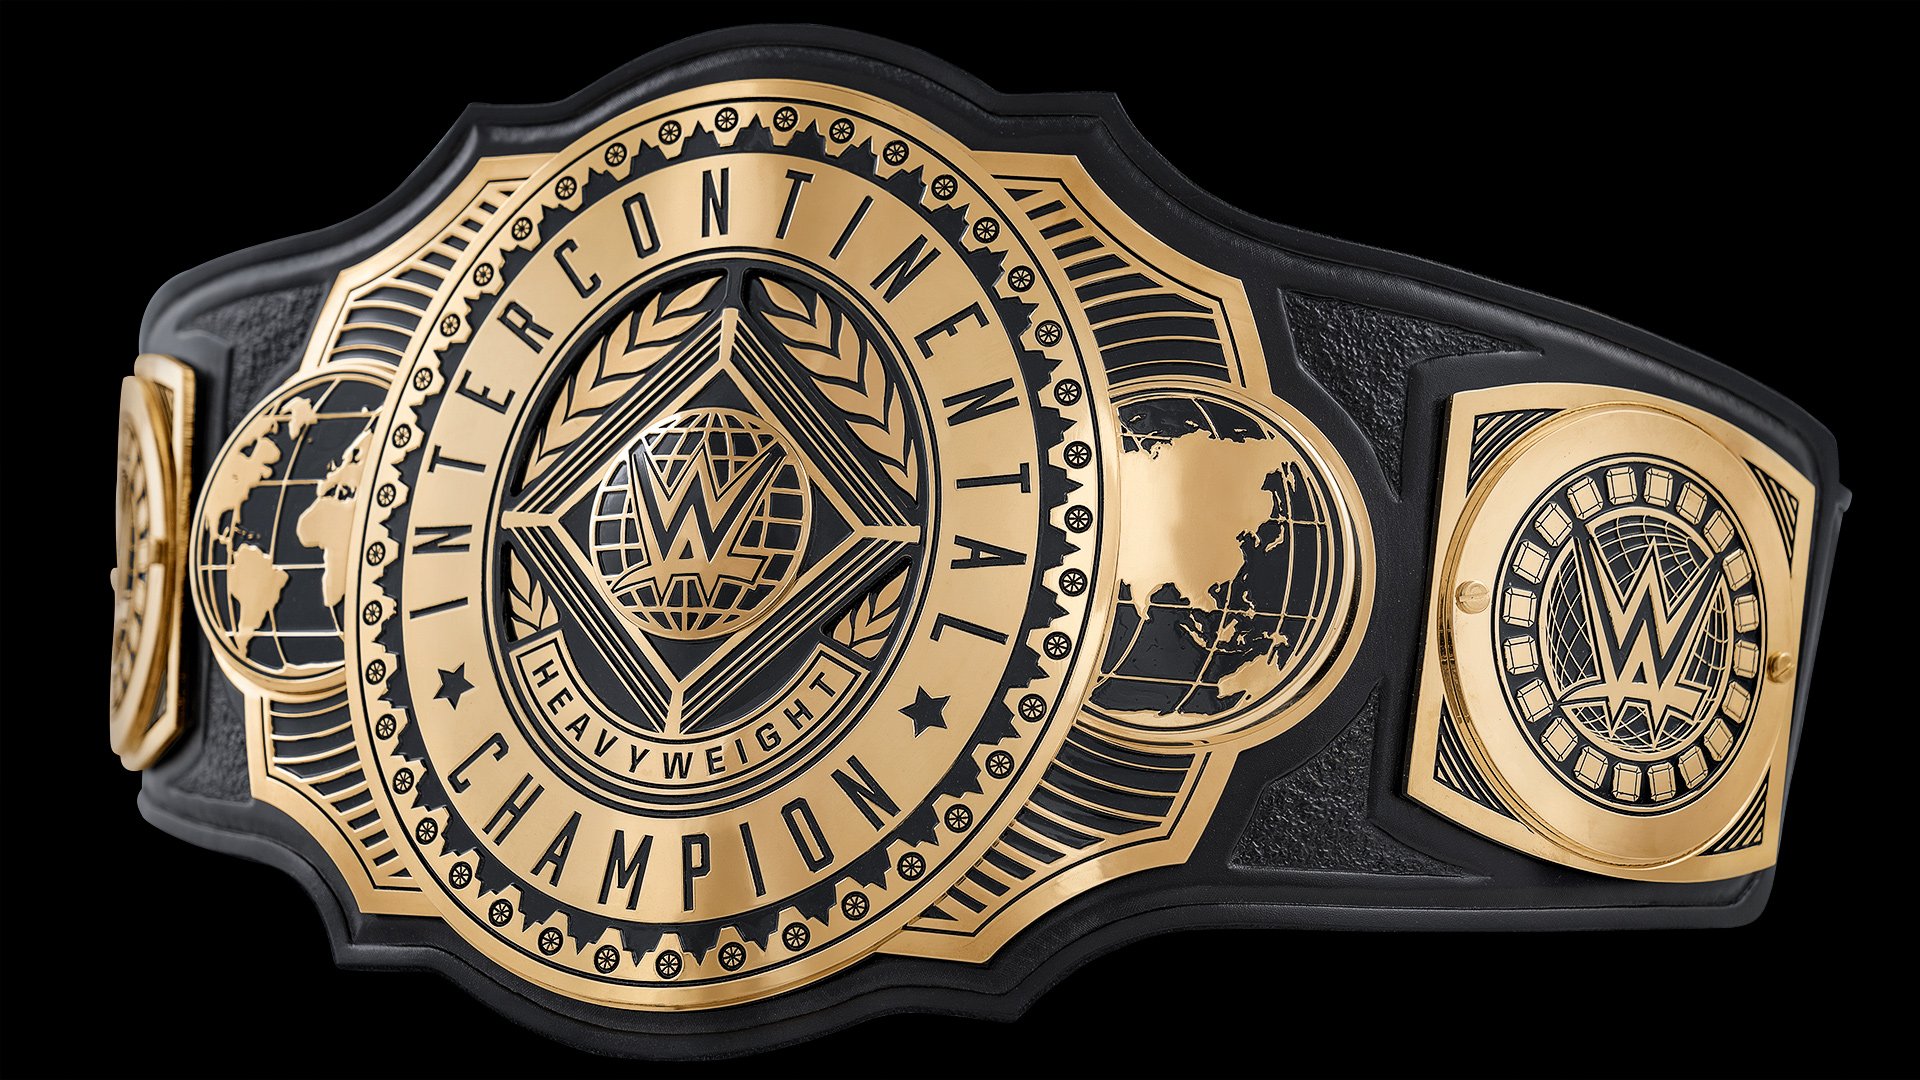 New Intercontinental Championship belt design unveiled on SmackDown